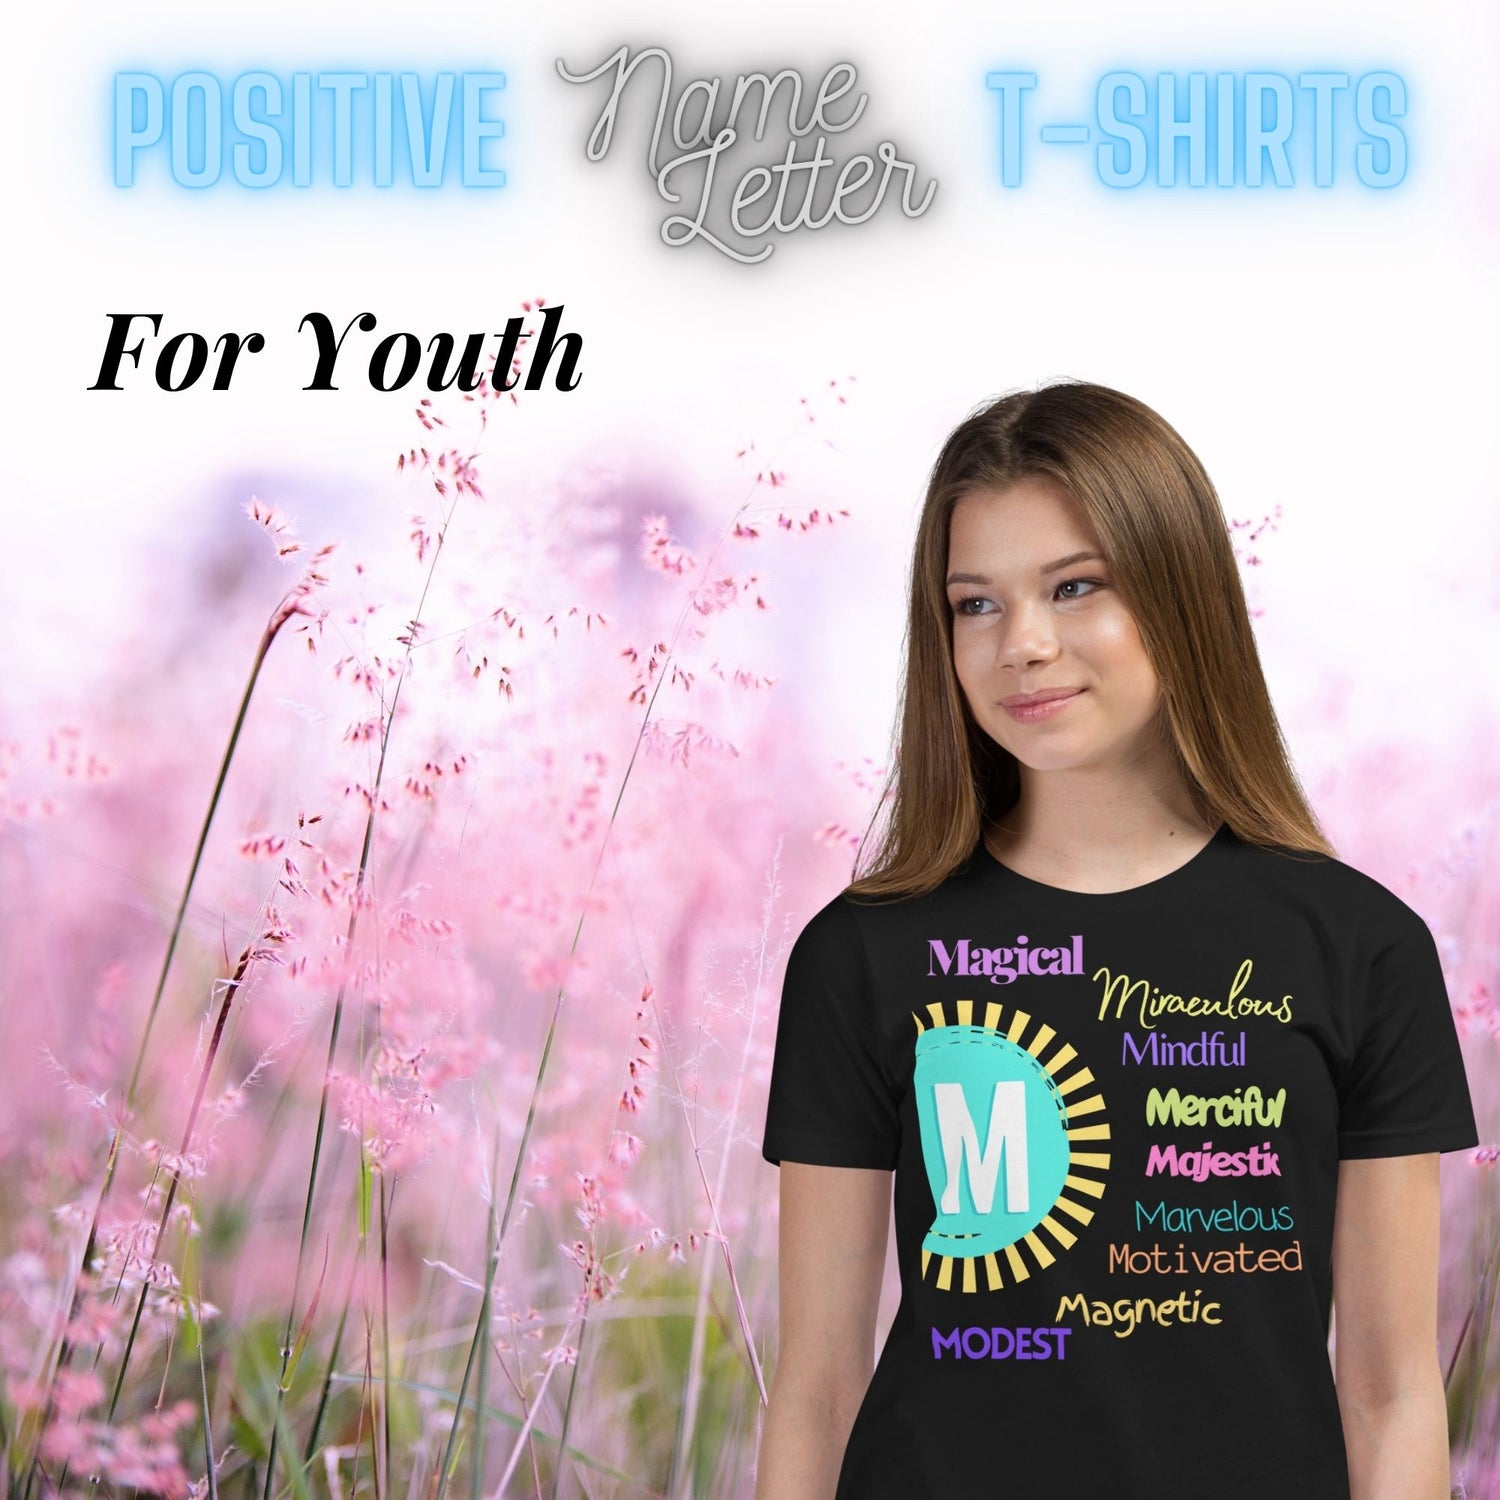 Positive words Name Letter T-Shirts